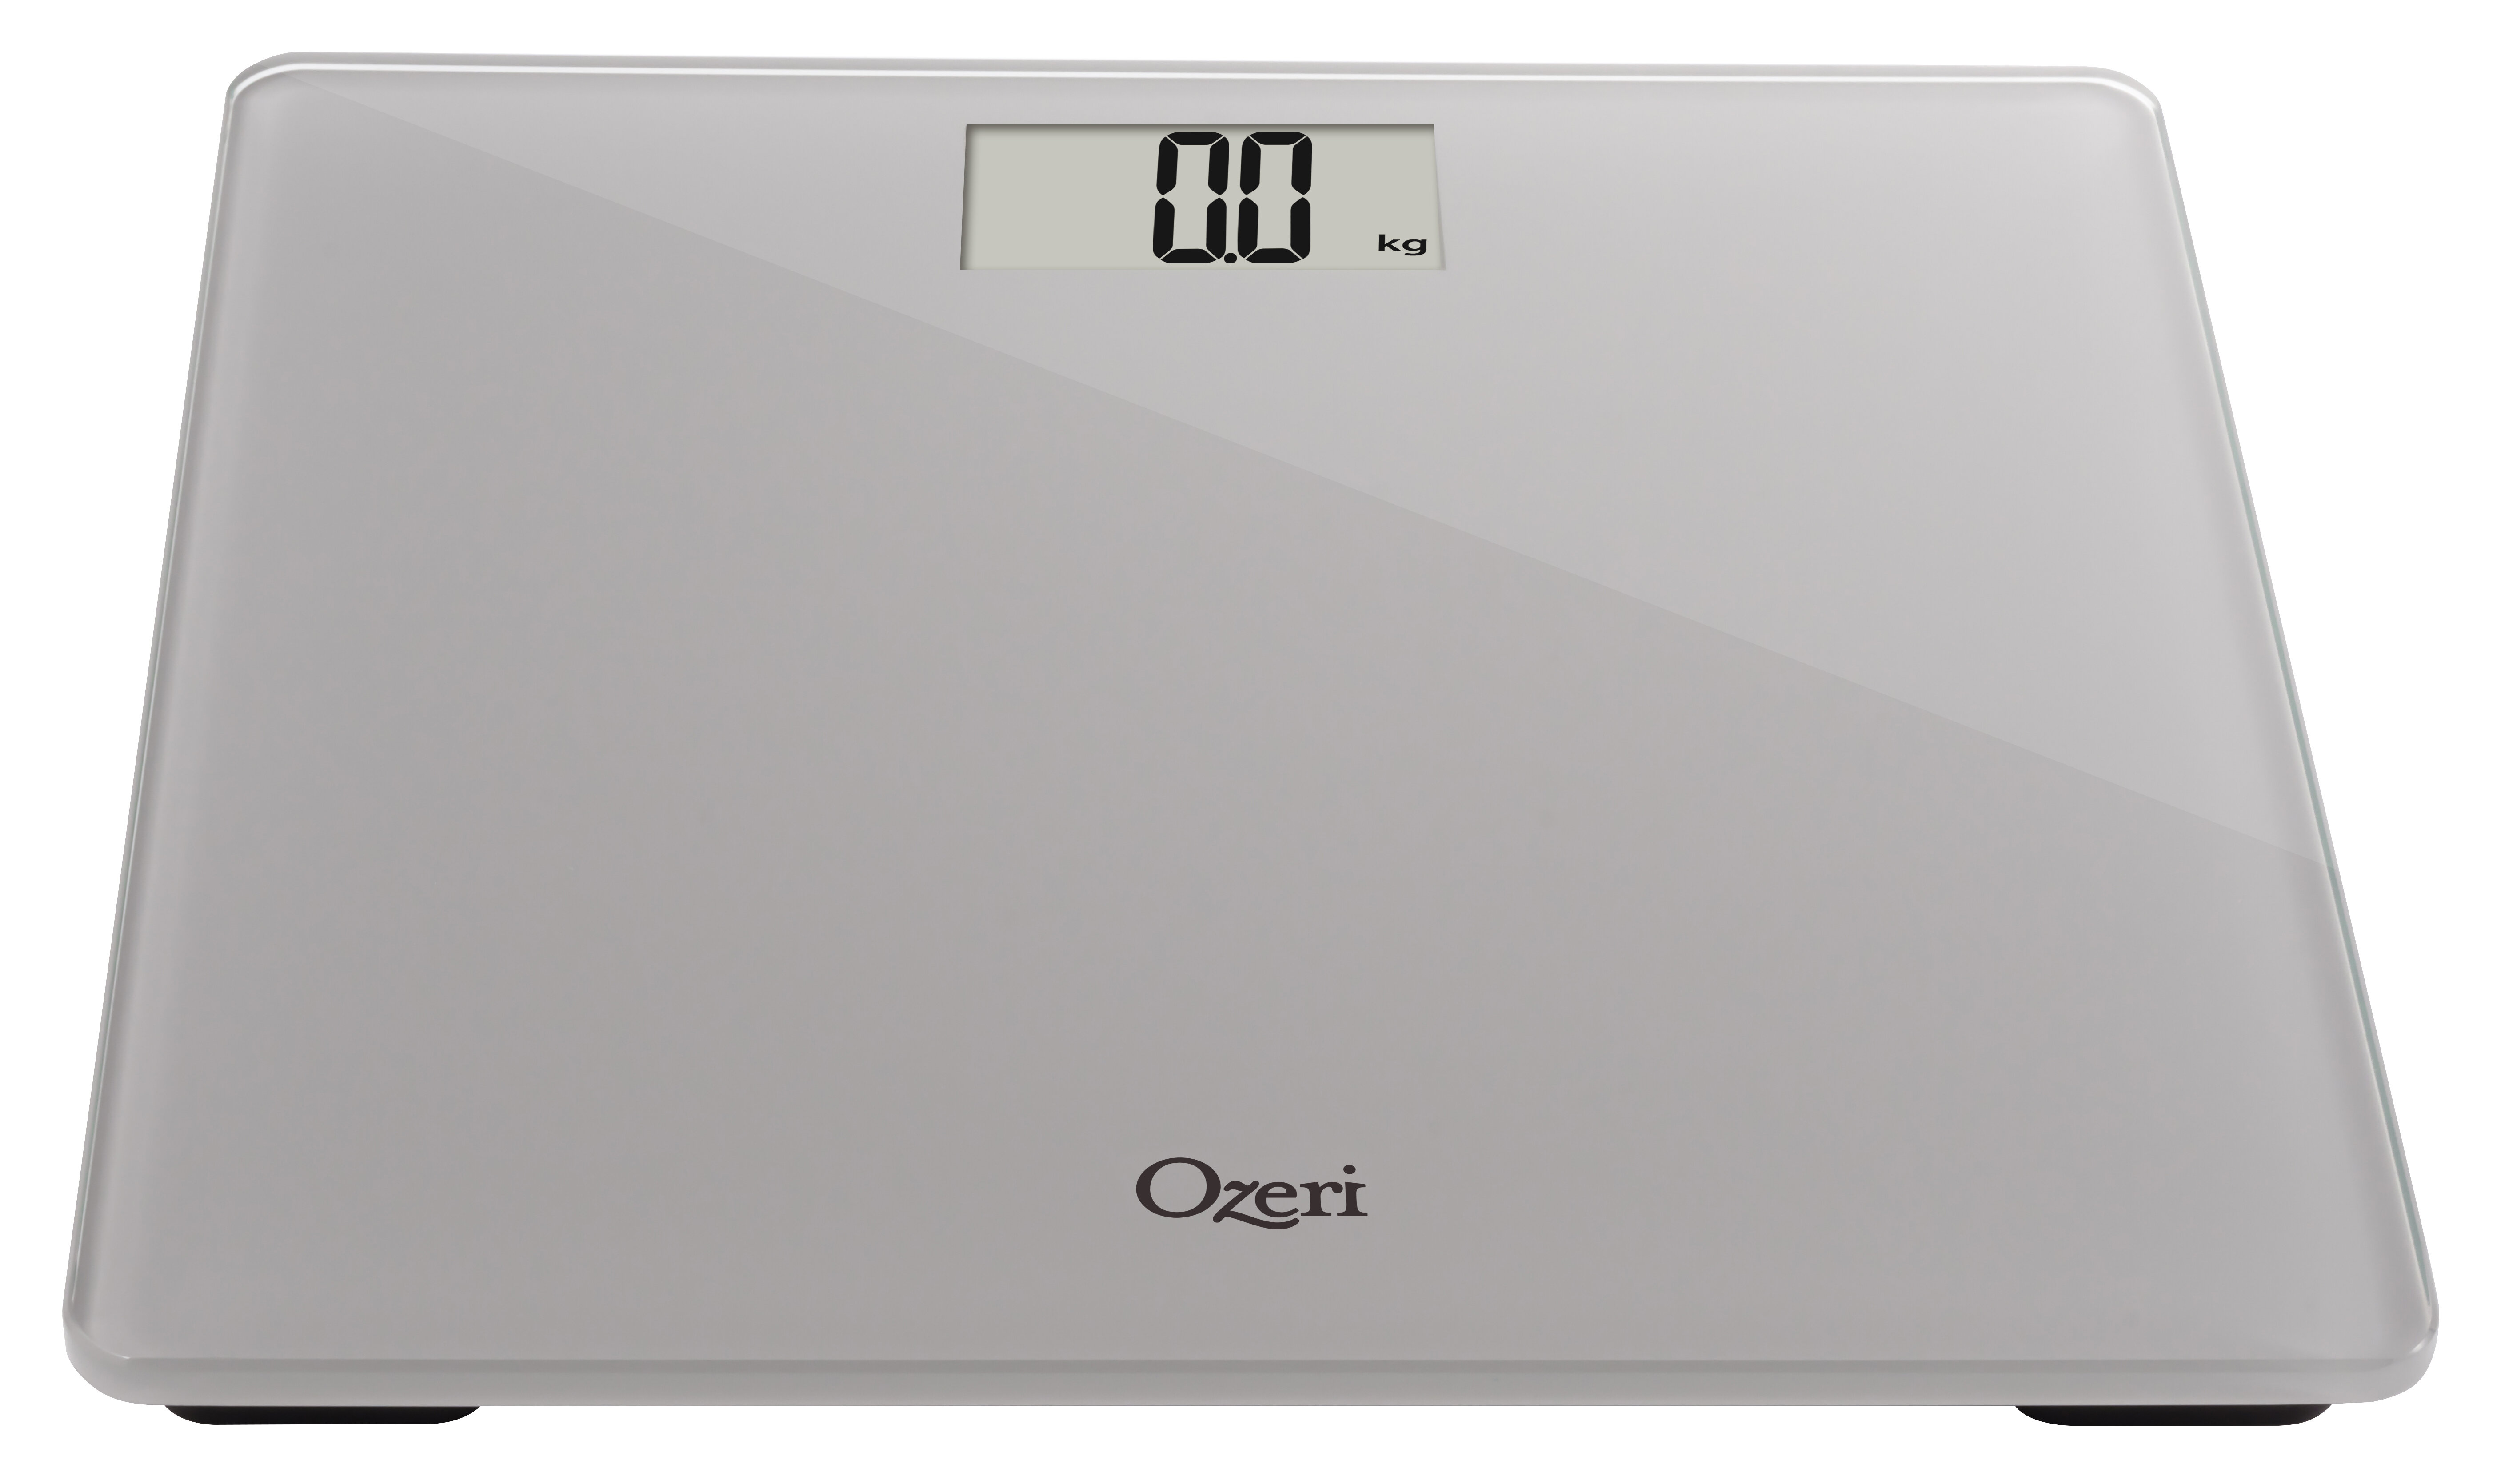 Ozeri WeightMaster (440 lbs / 200 kg) Bath Scale with BMI, BMR and 50 Gram Weight Change Detection, White